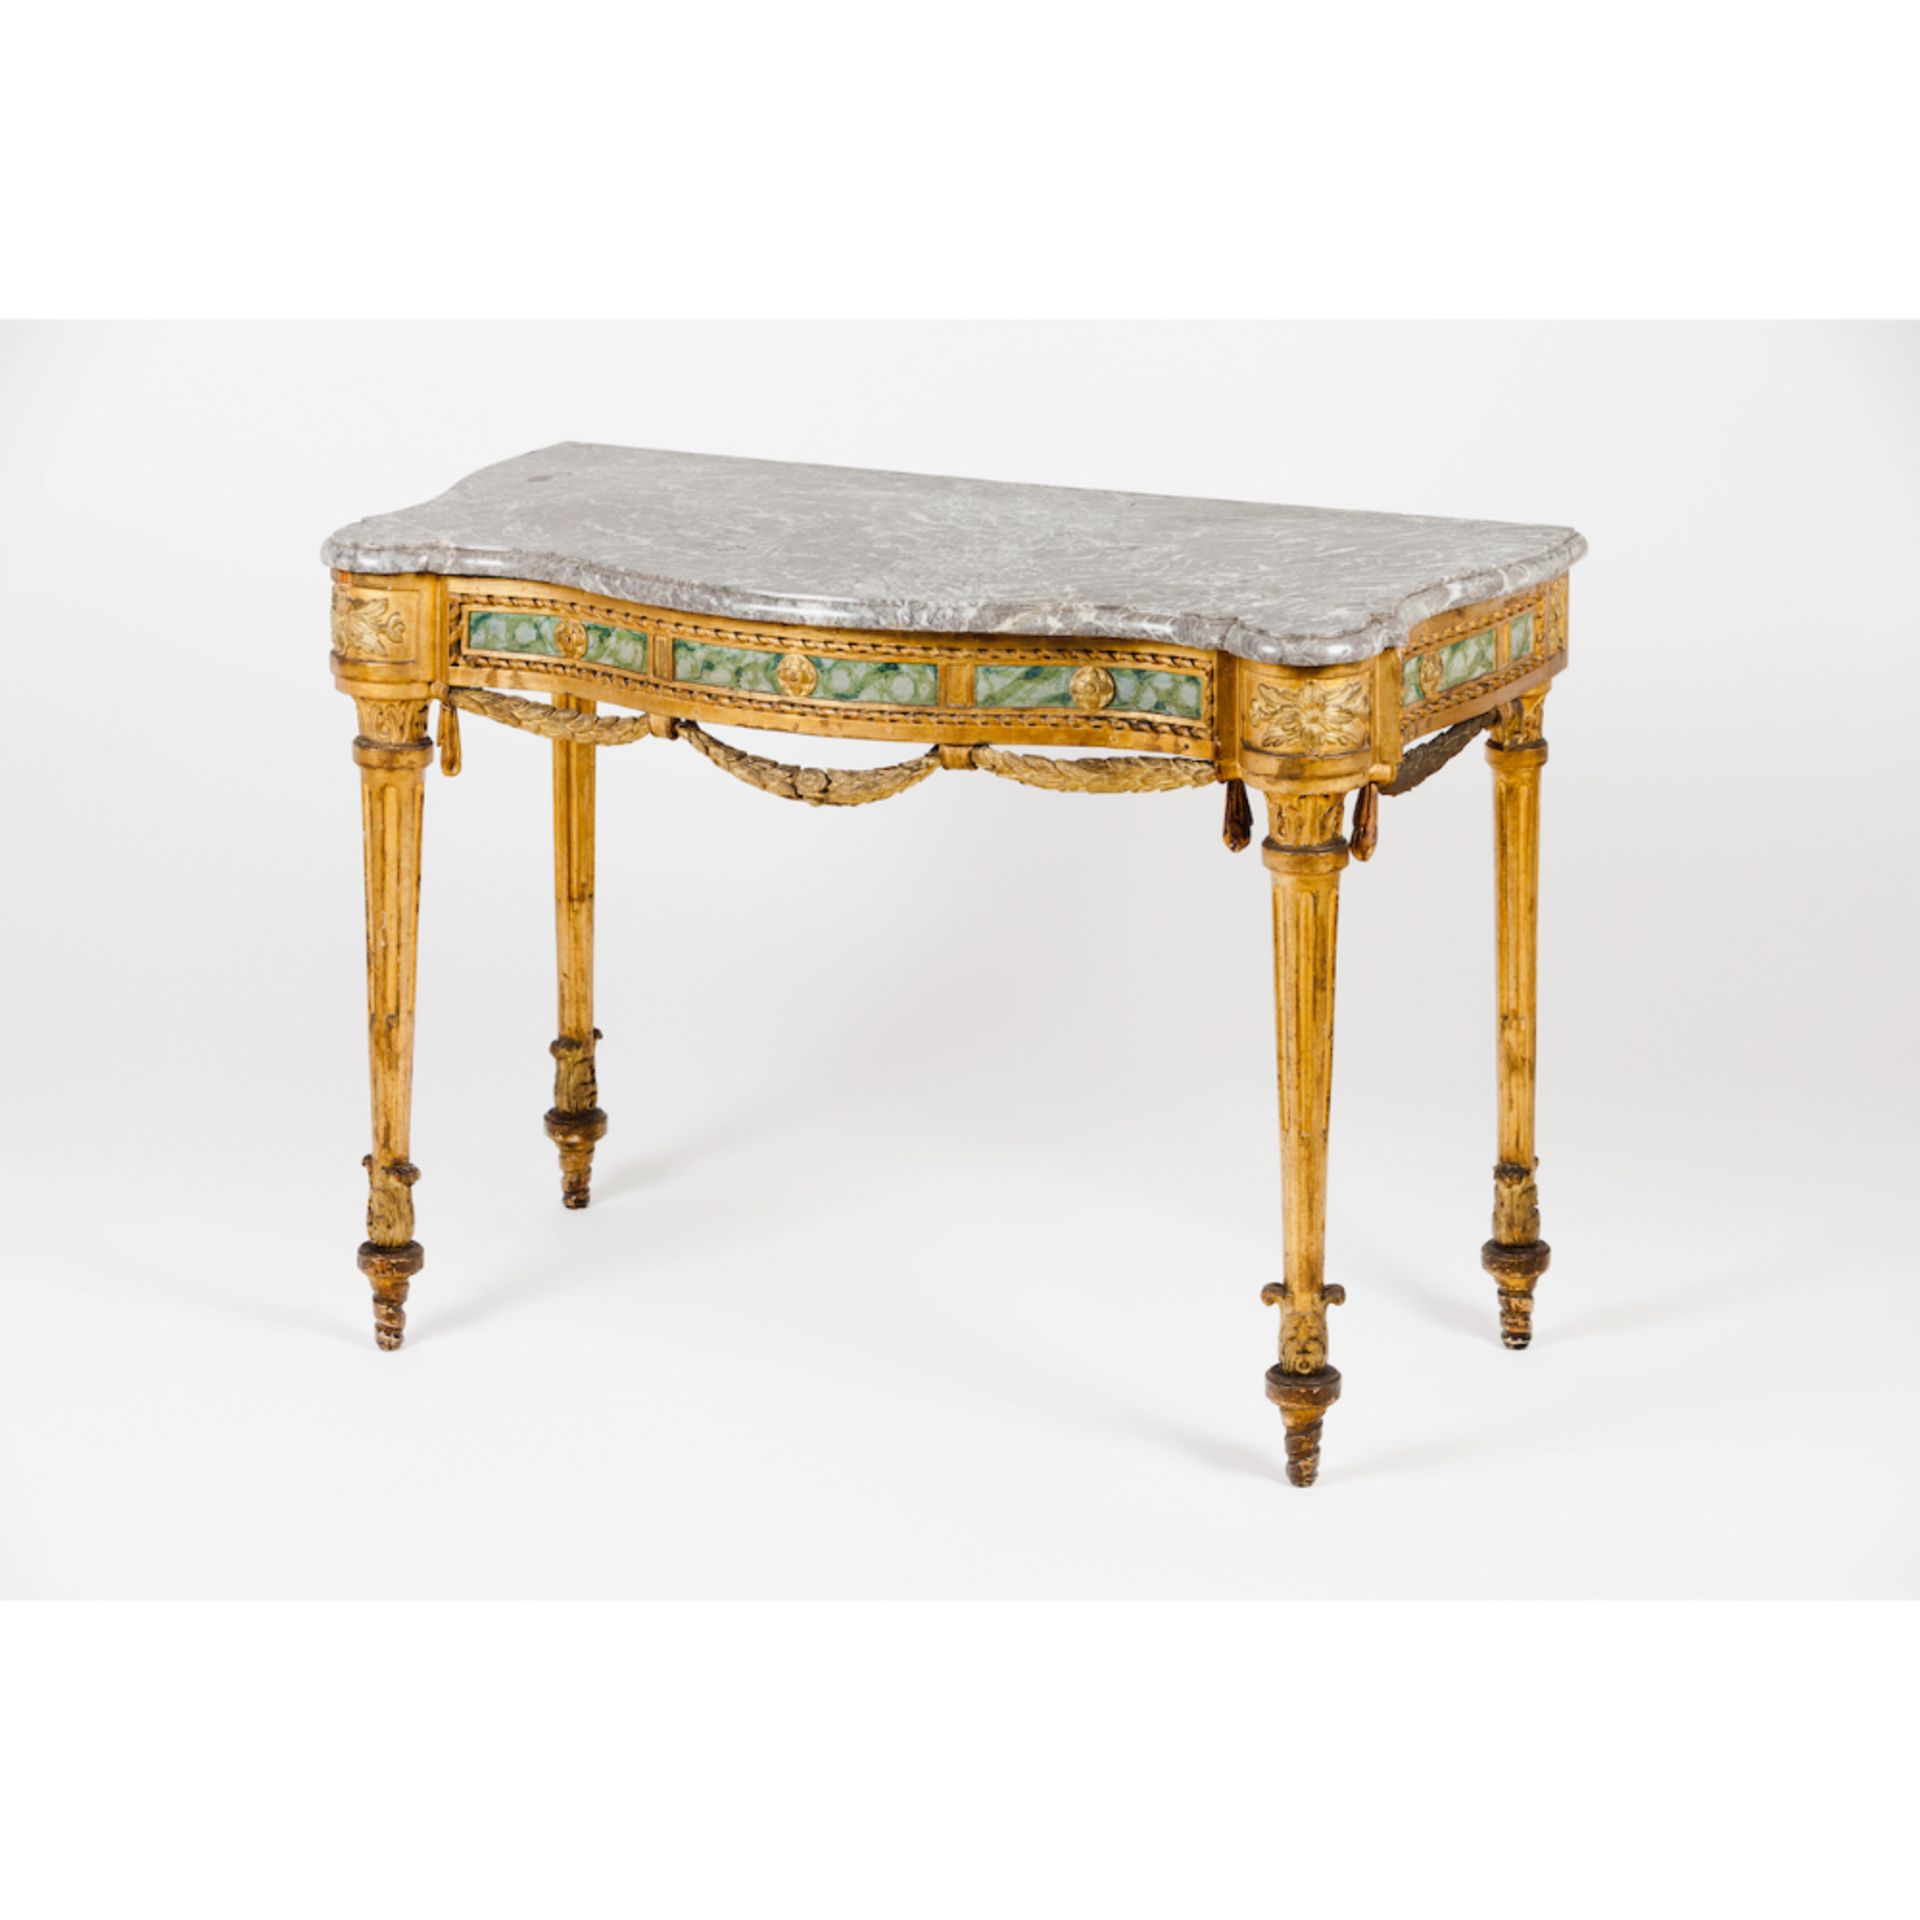 A pair of Neoclassical console tablesWood Gilt, carved and marbled decoration Grey marble - Image 2 of 2